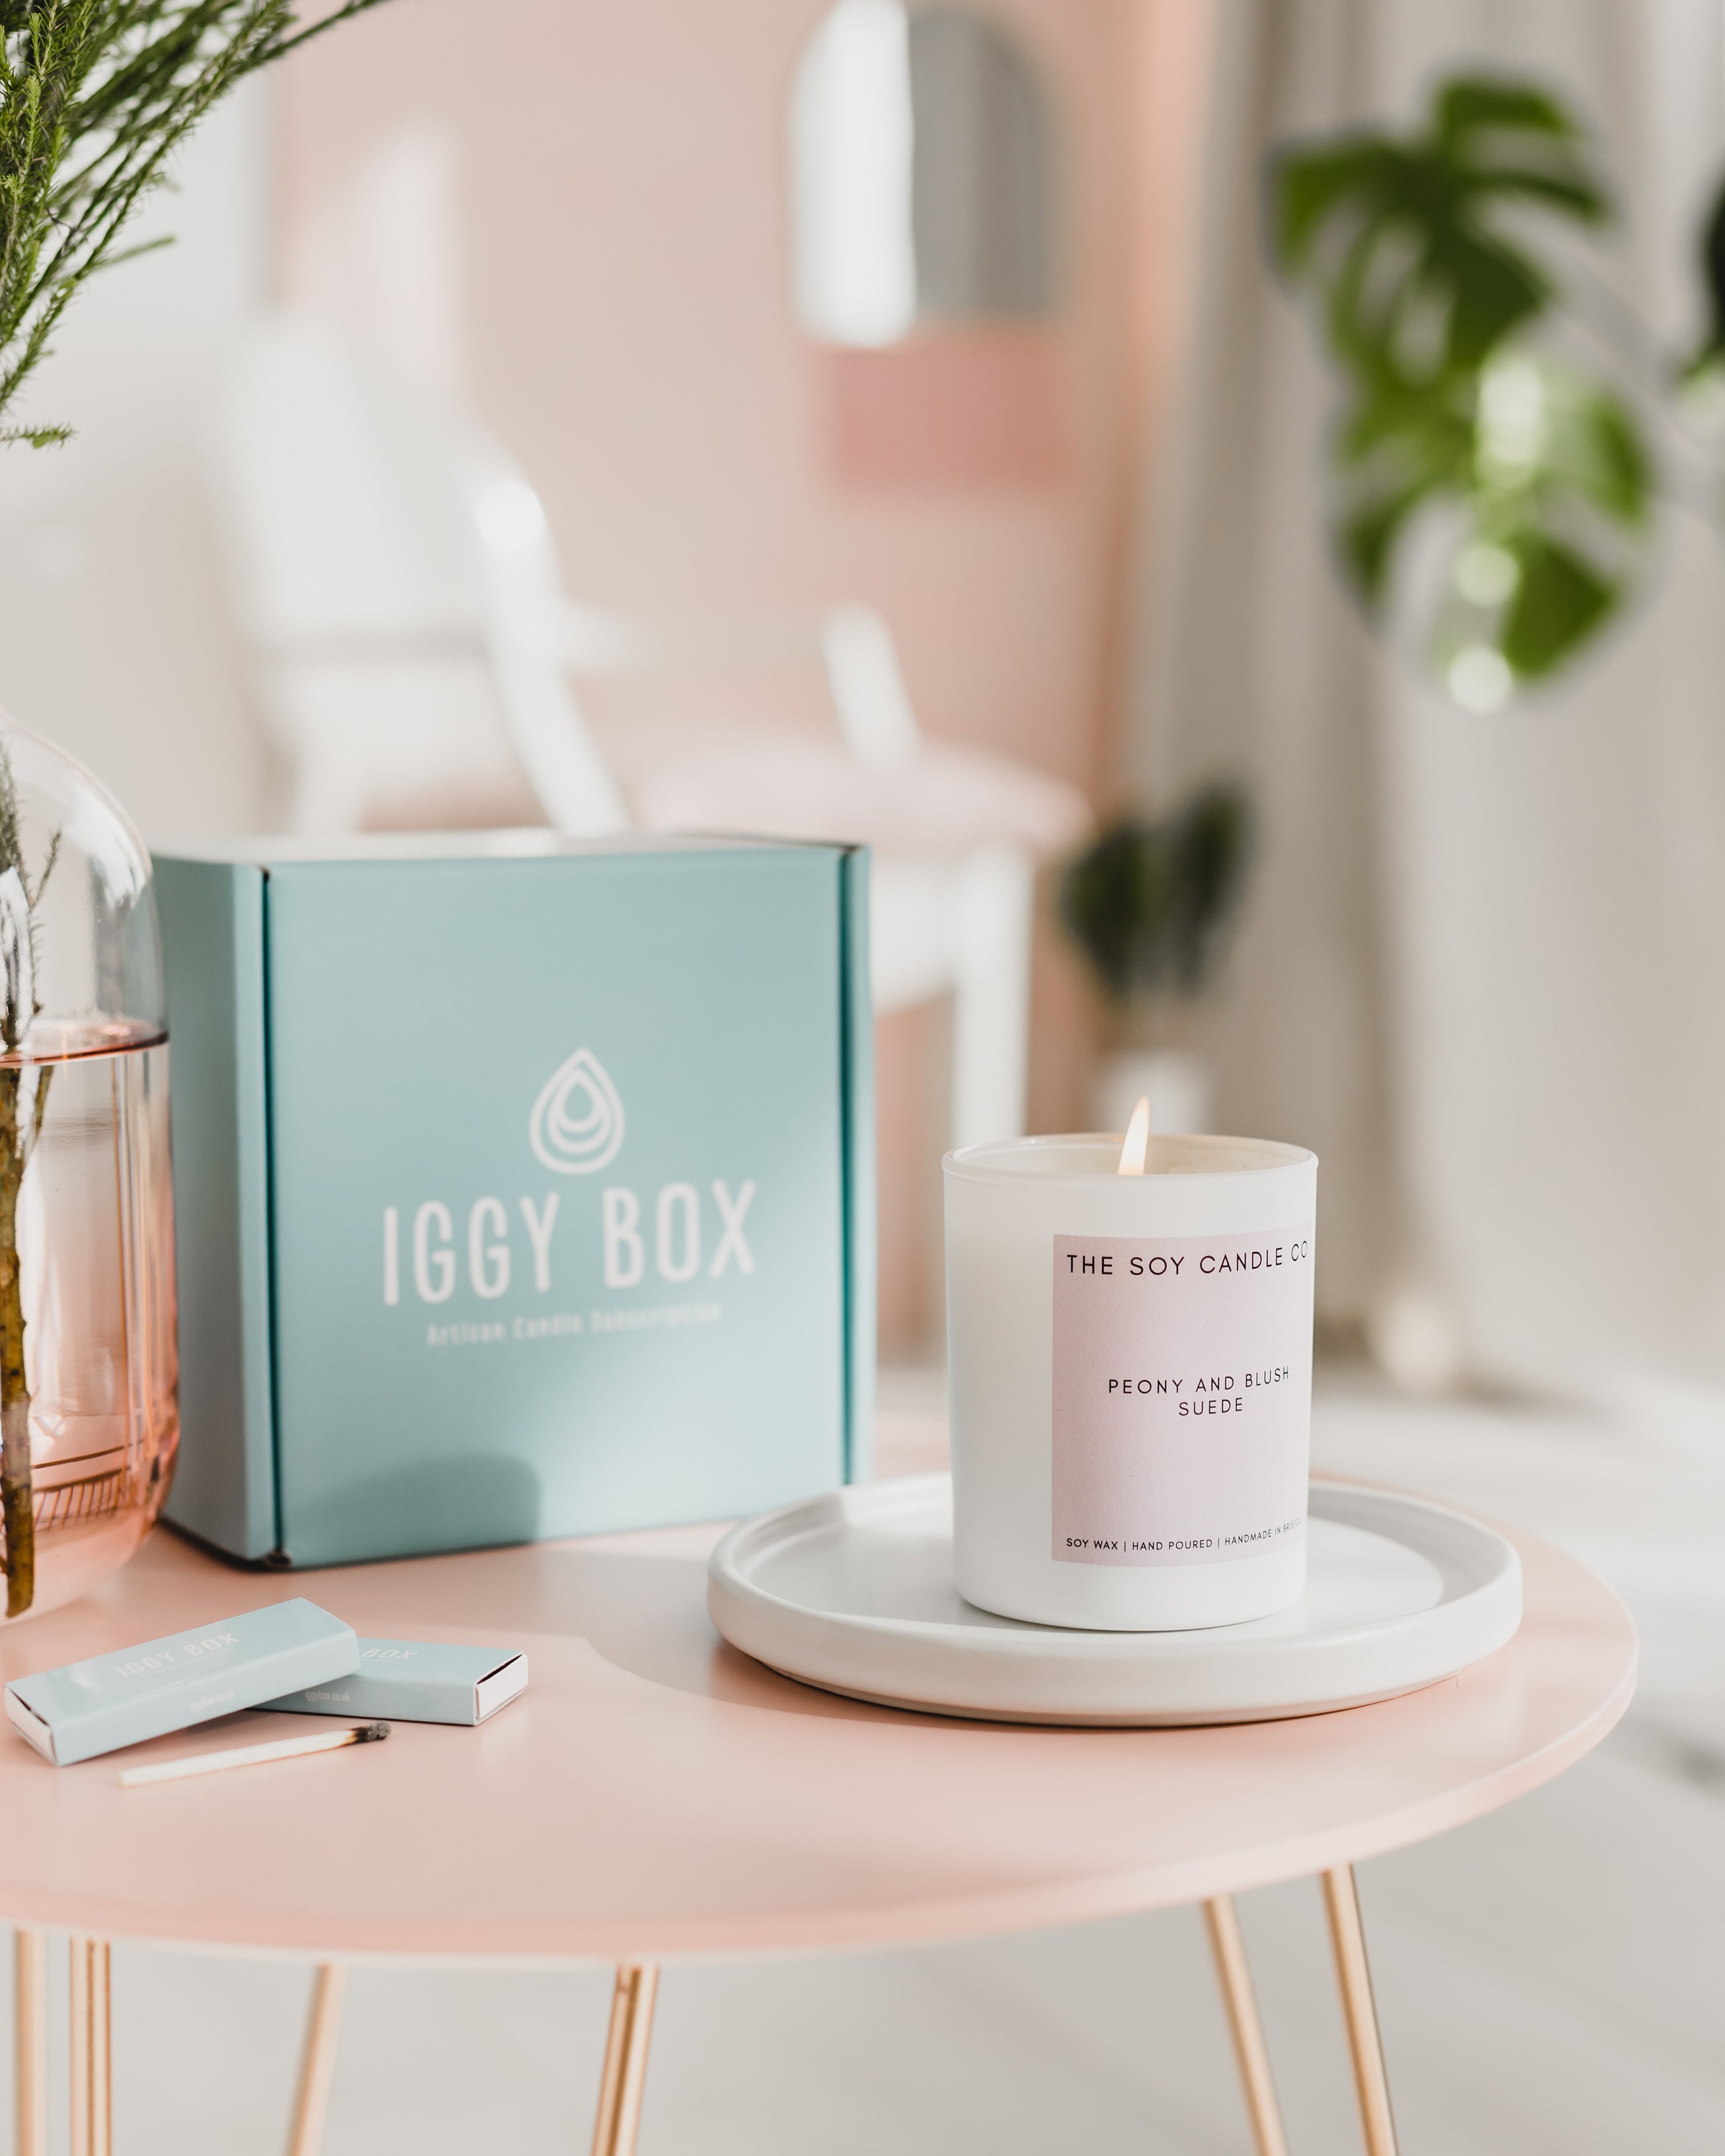 Blush 10oz Ceramic Soy Candle With Lid